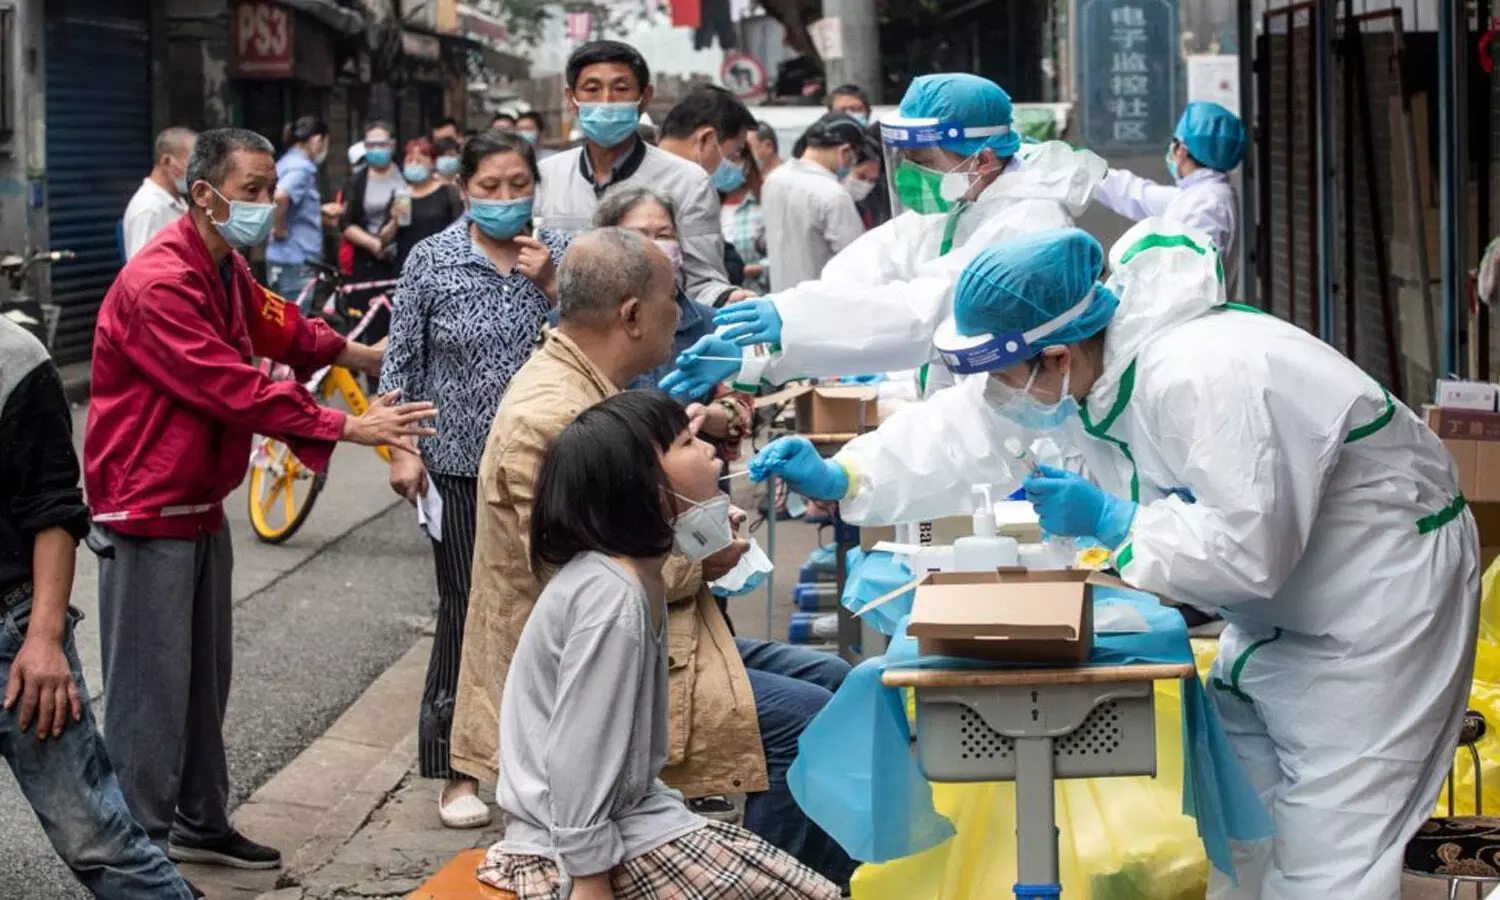 Coronavirus Outbreak In China: Shortage of ventilators, seriously ill people are being asked to stay at home